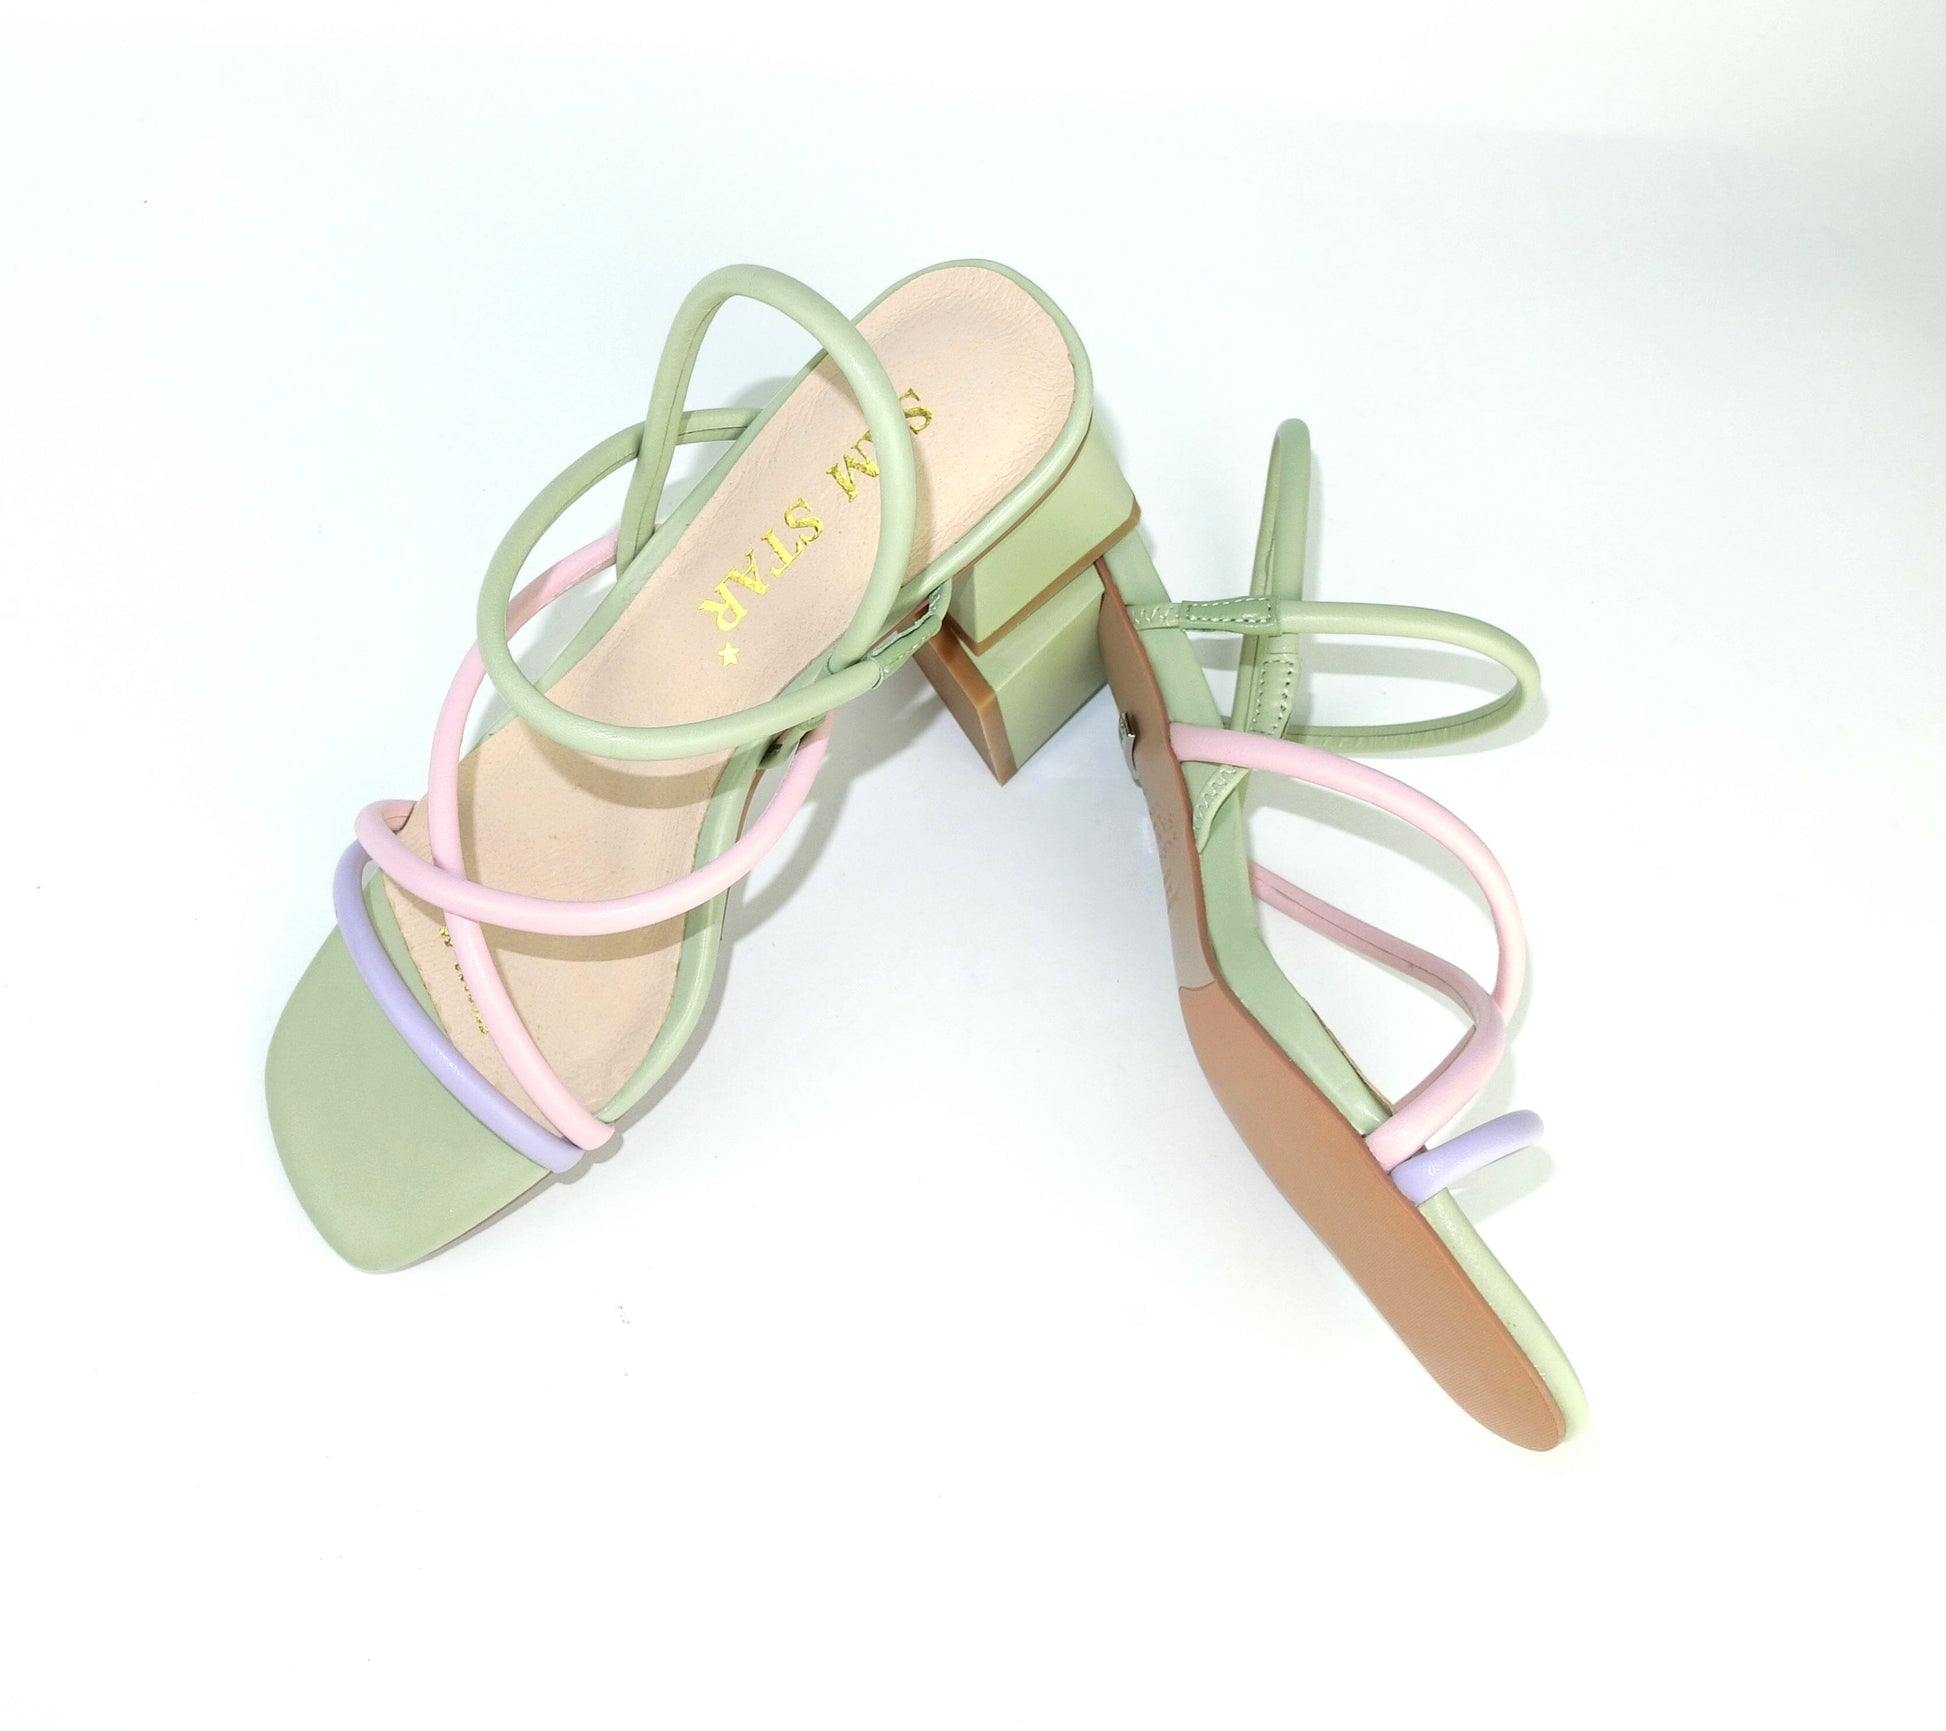 SS22007 Genuine leather strappy block heel sandals in mint, pink and lilac sandals Sam Star Shoes 